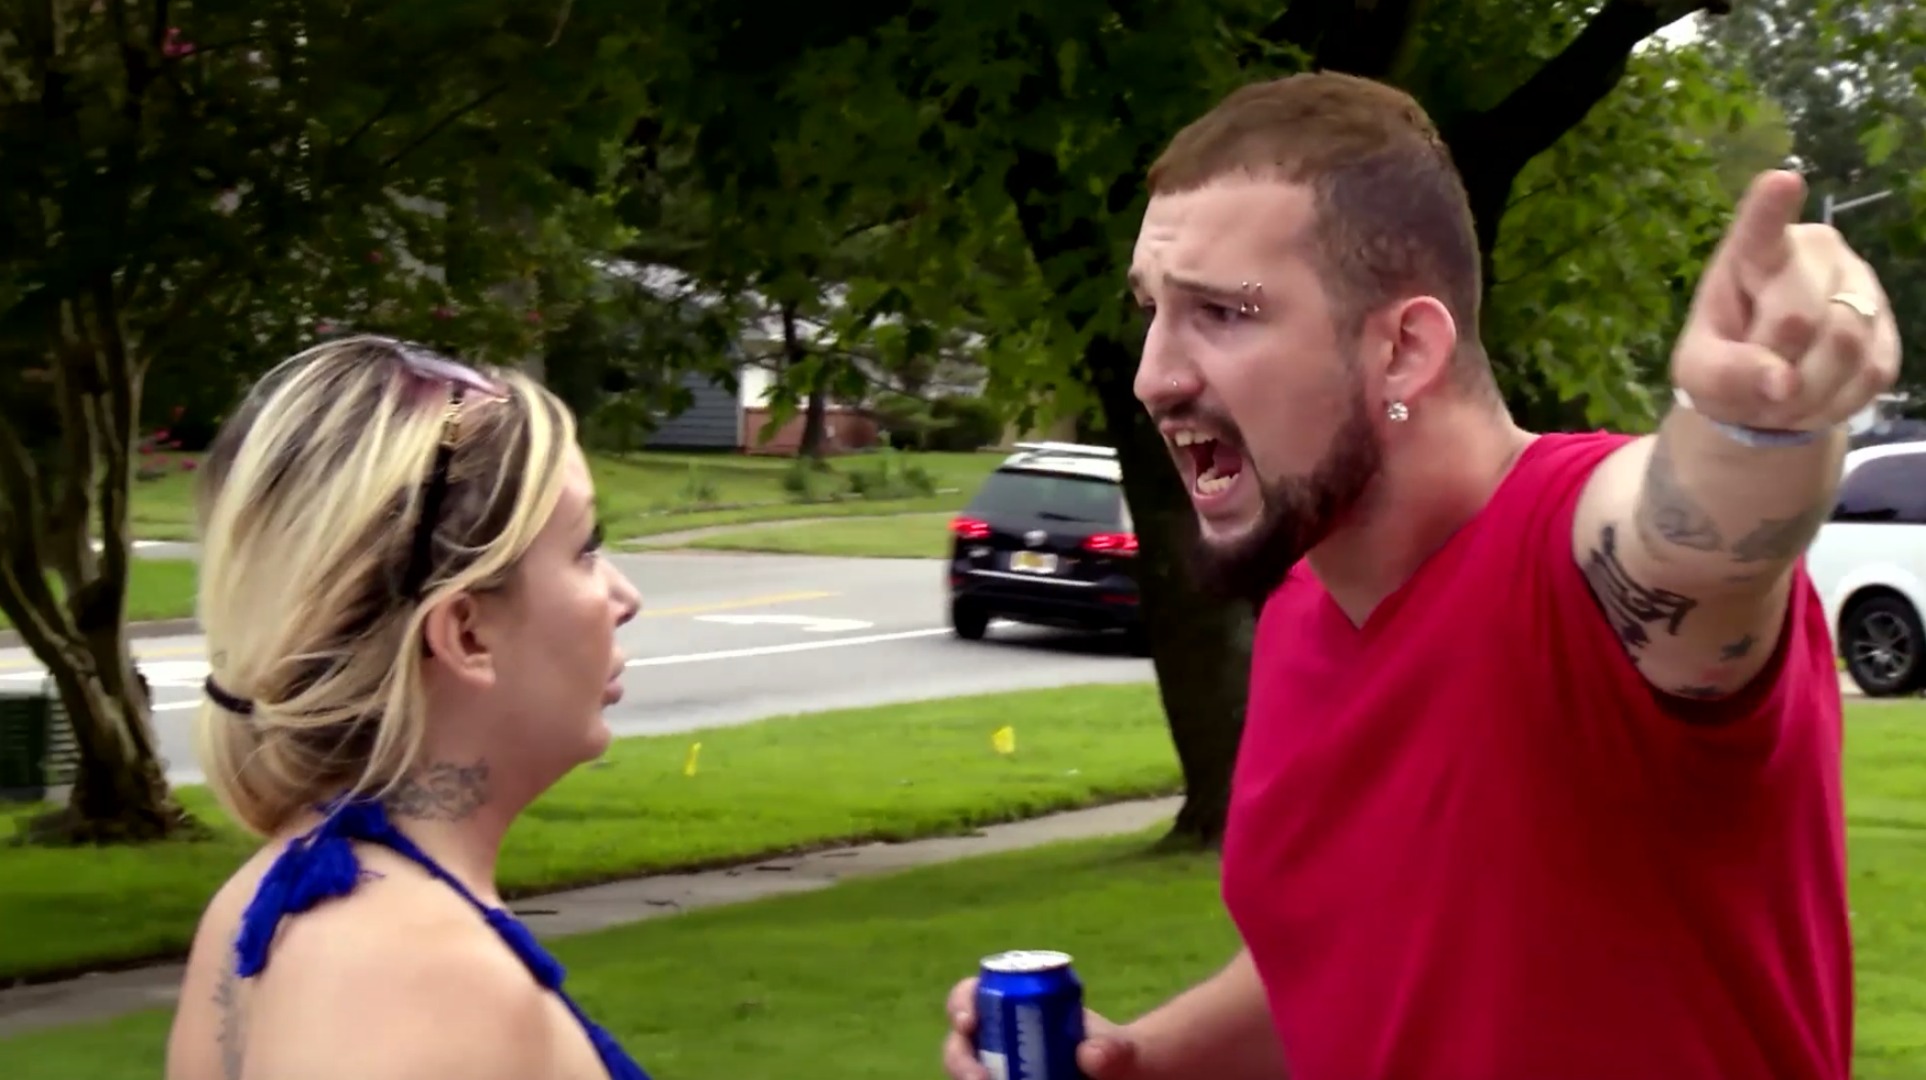 Shane Catches Lacey in a Lie!